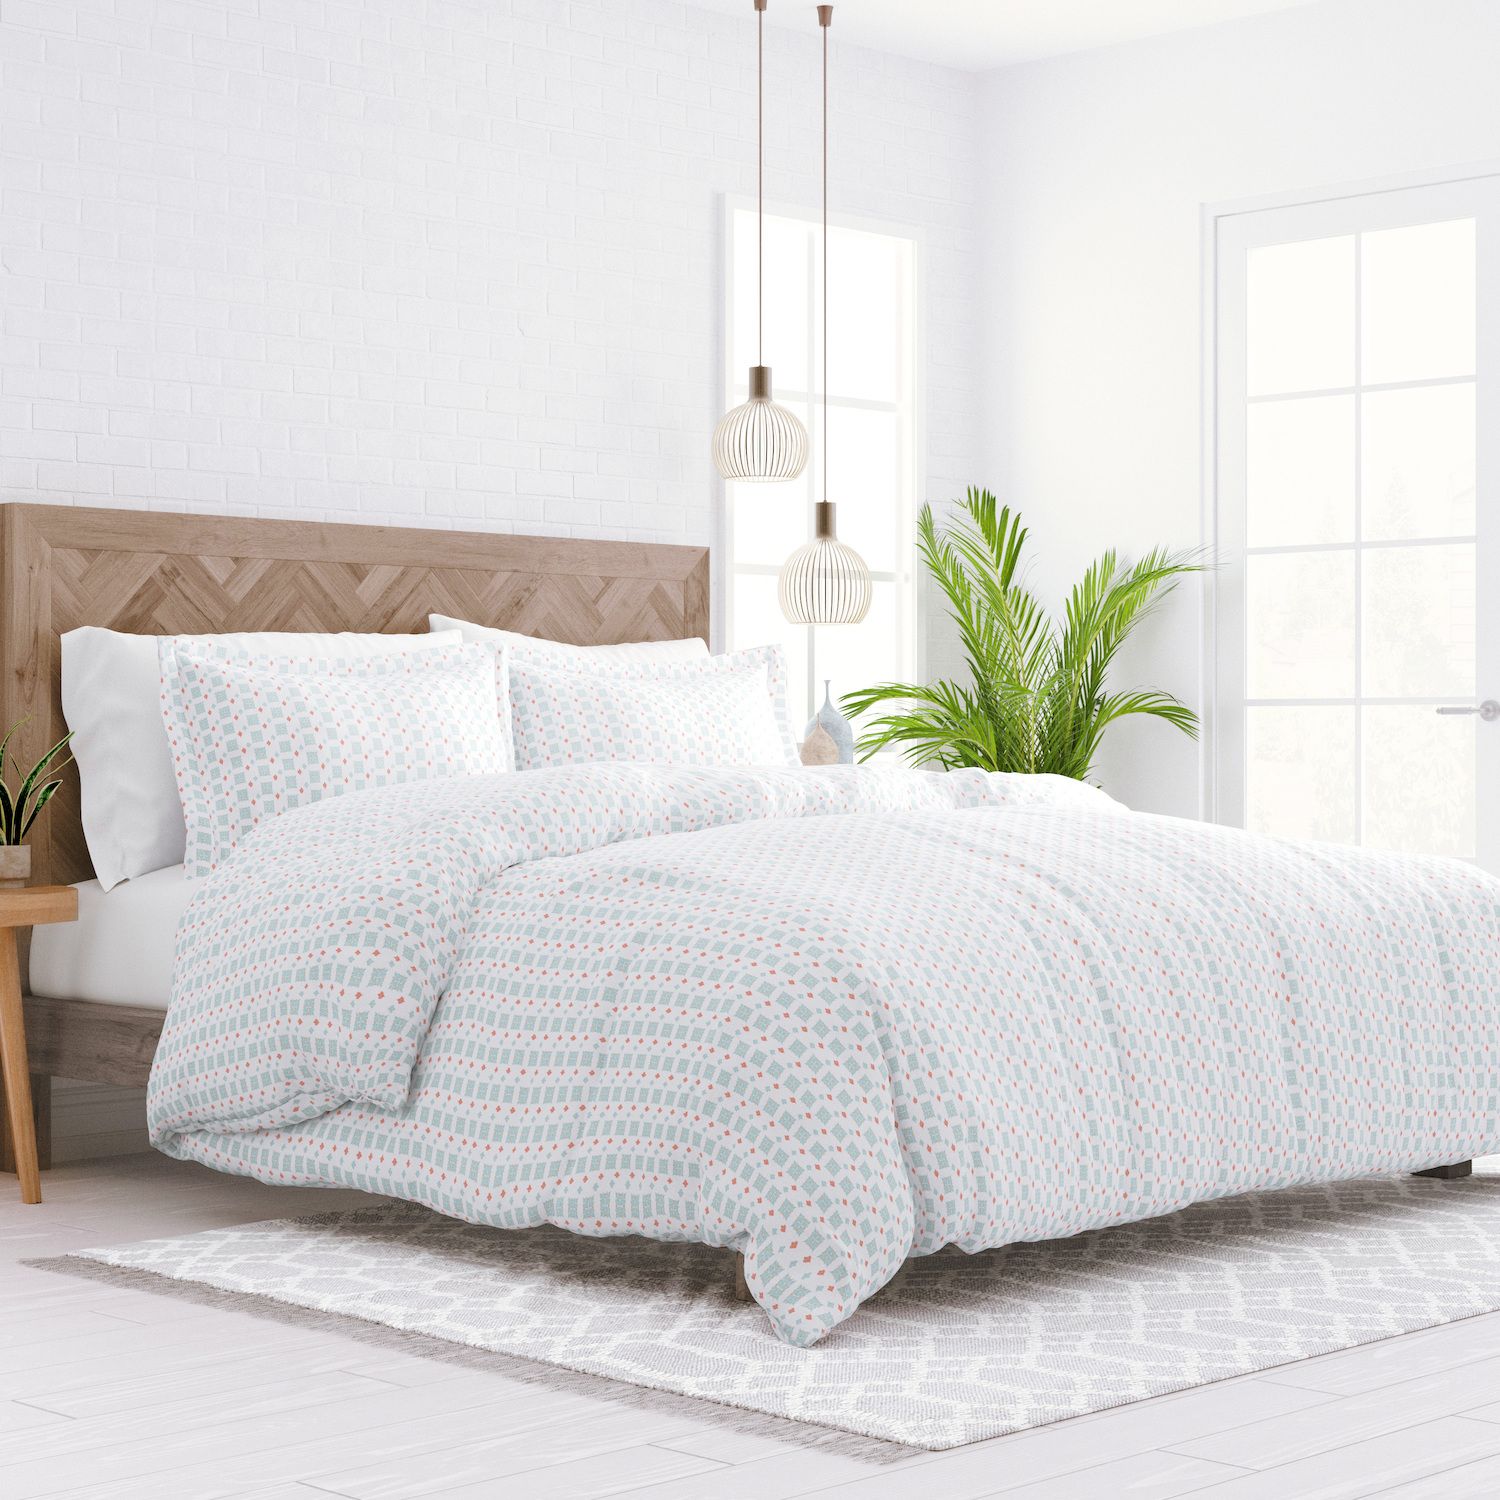 Image for Home Collection Premium Ultra Pattern Duvet Cover Set at Kohl's.